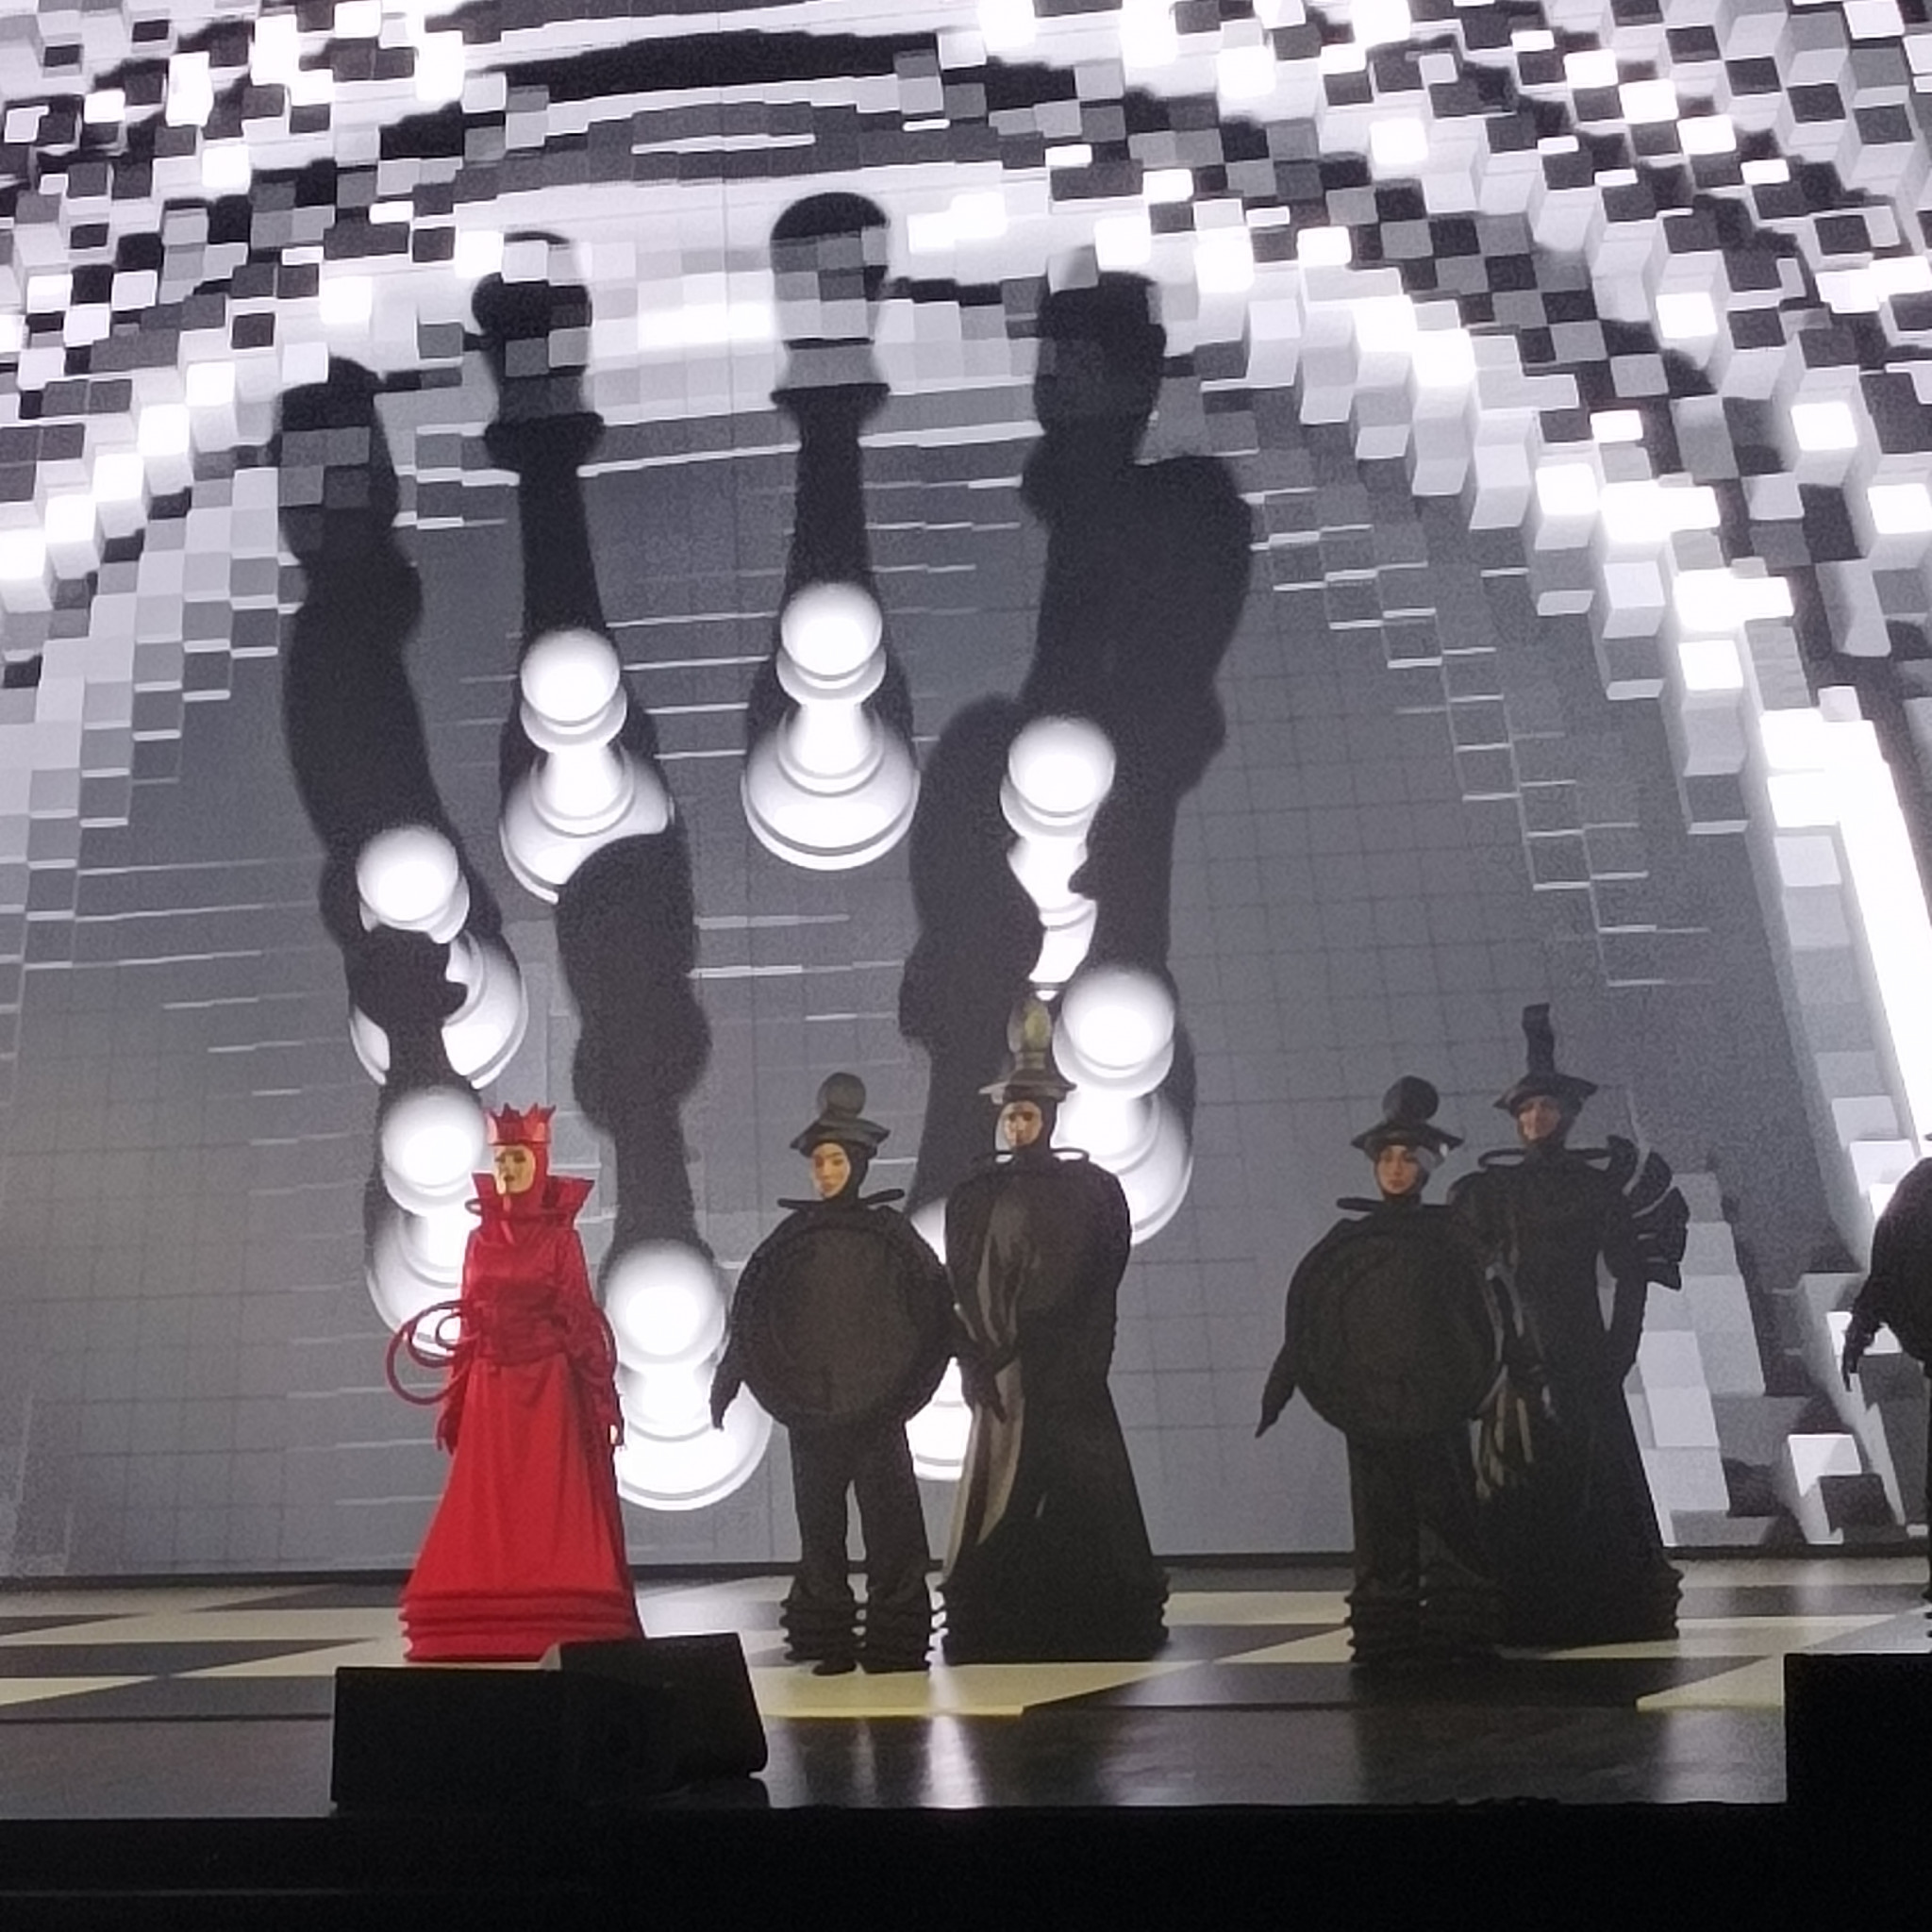 Dancers as chess pieces at the opening of the FIDE World Cup in Baku tonight ©ITG